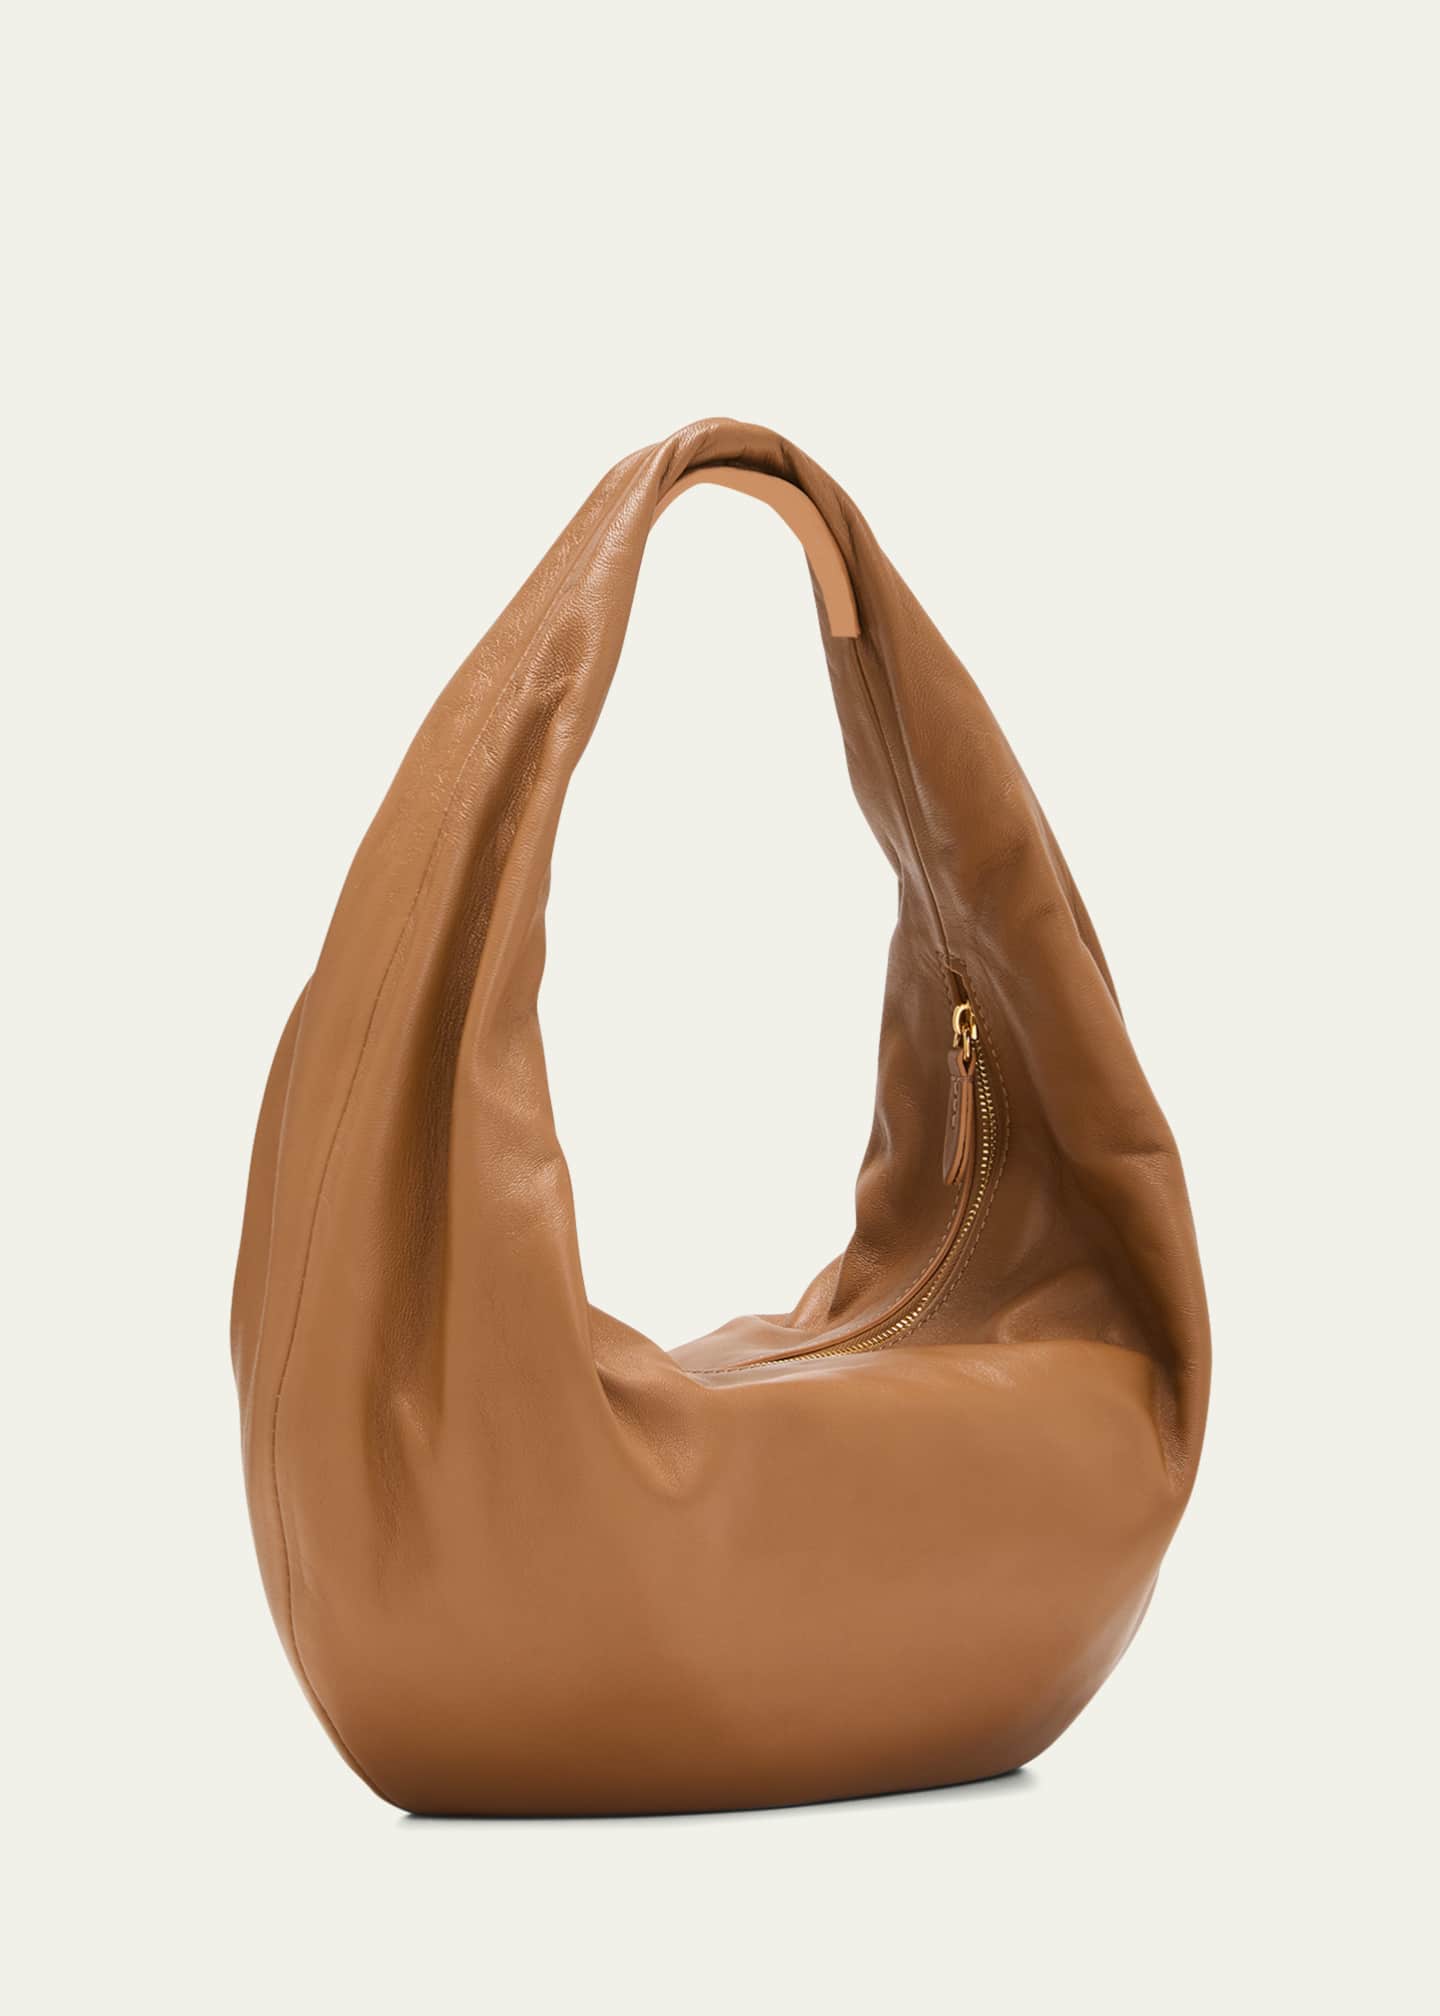 The Medium Olivia Hobo In Taupe Leather by Khaite at ORCHARD MILE